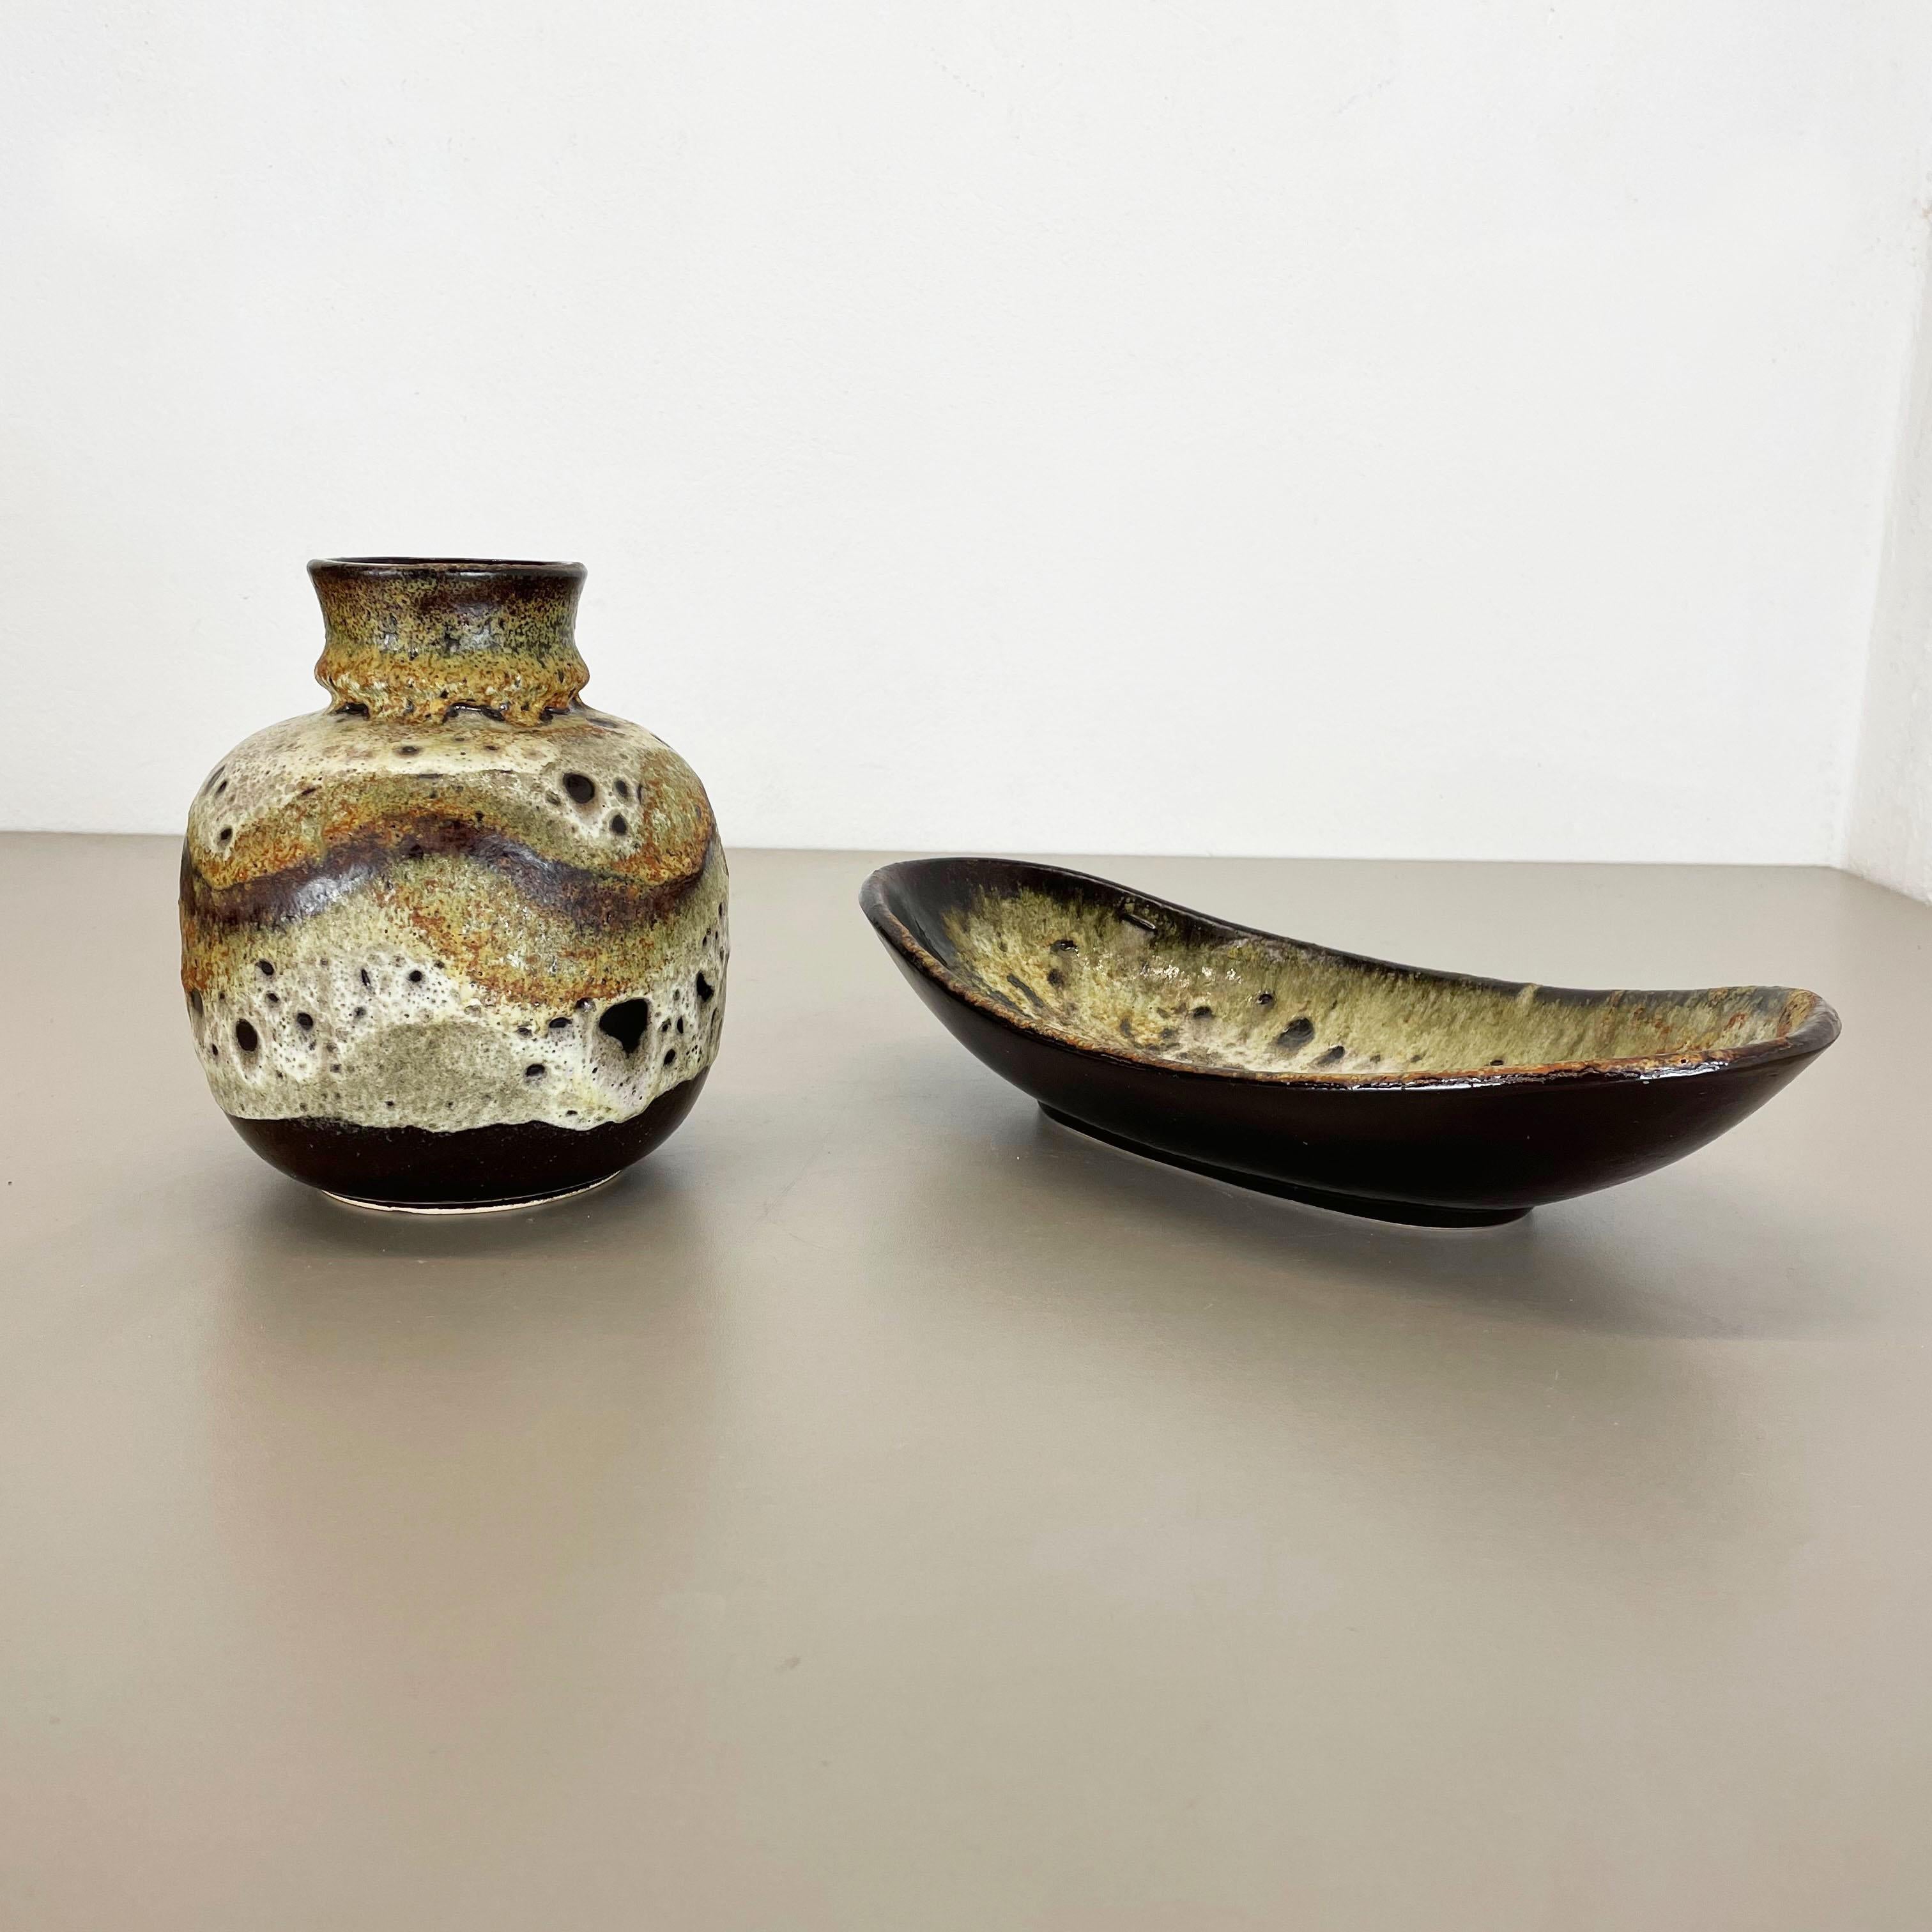 Article:

set of 2 pottery ceramic elements


Producer:

Ruscha, Germany



Decade:

1960s


Description:

This original vintage ceramic set was designed and produced in the 1960s by Ruscha in Germany. This offer contains a set of